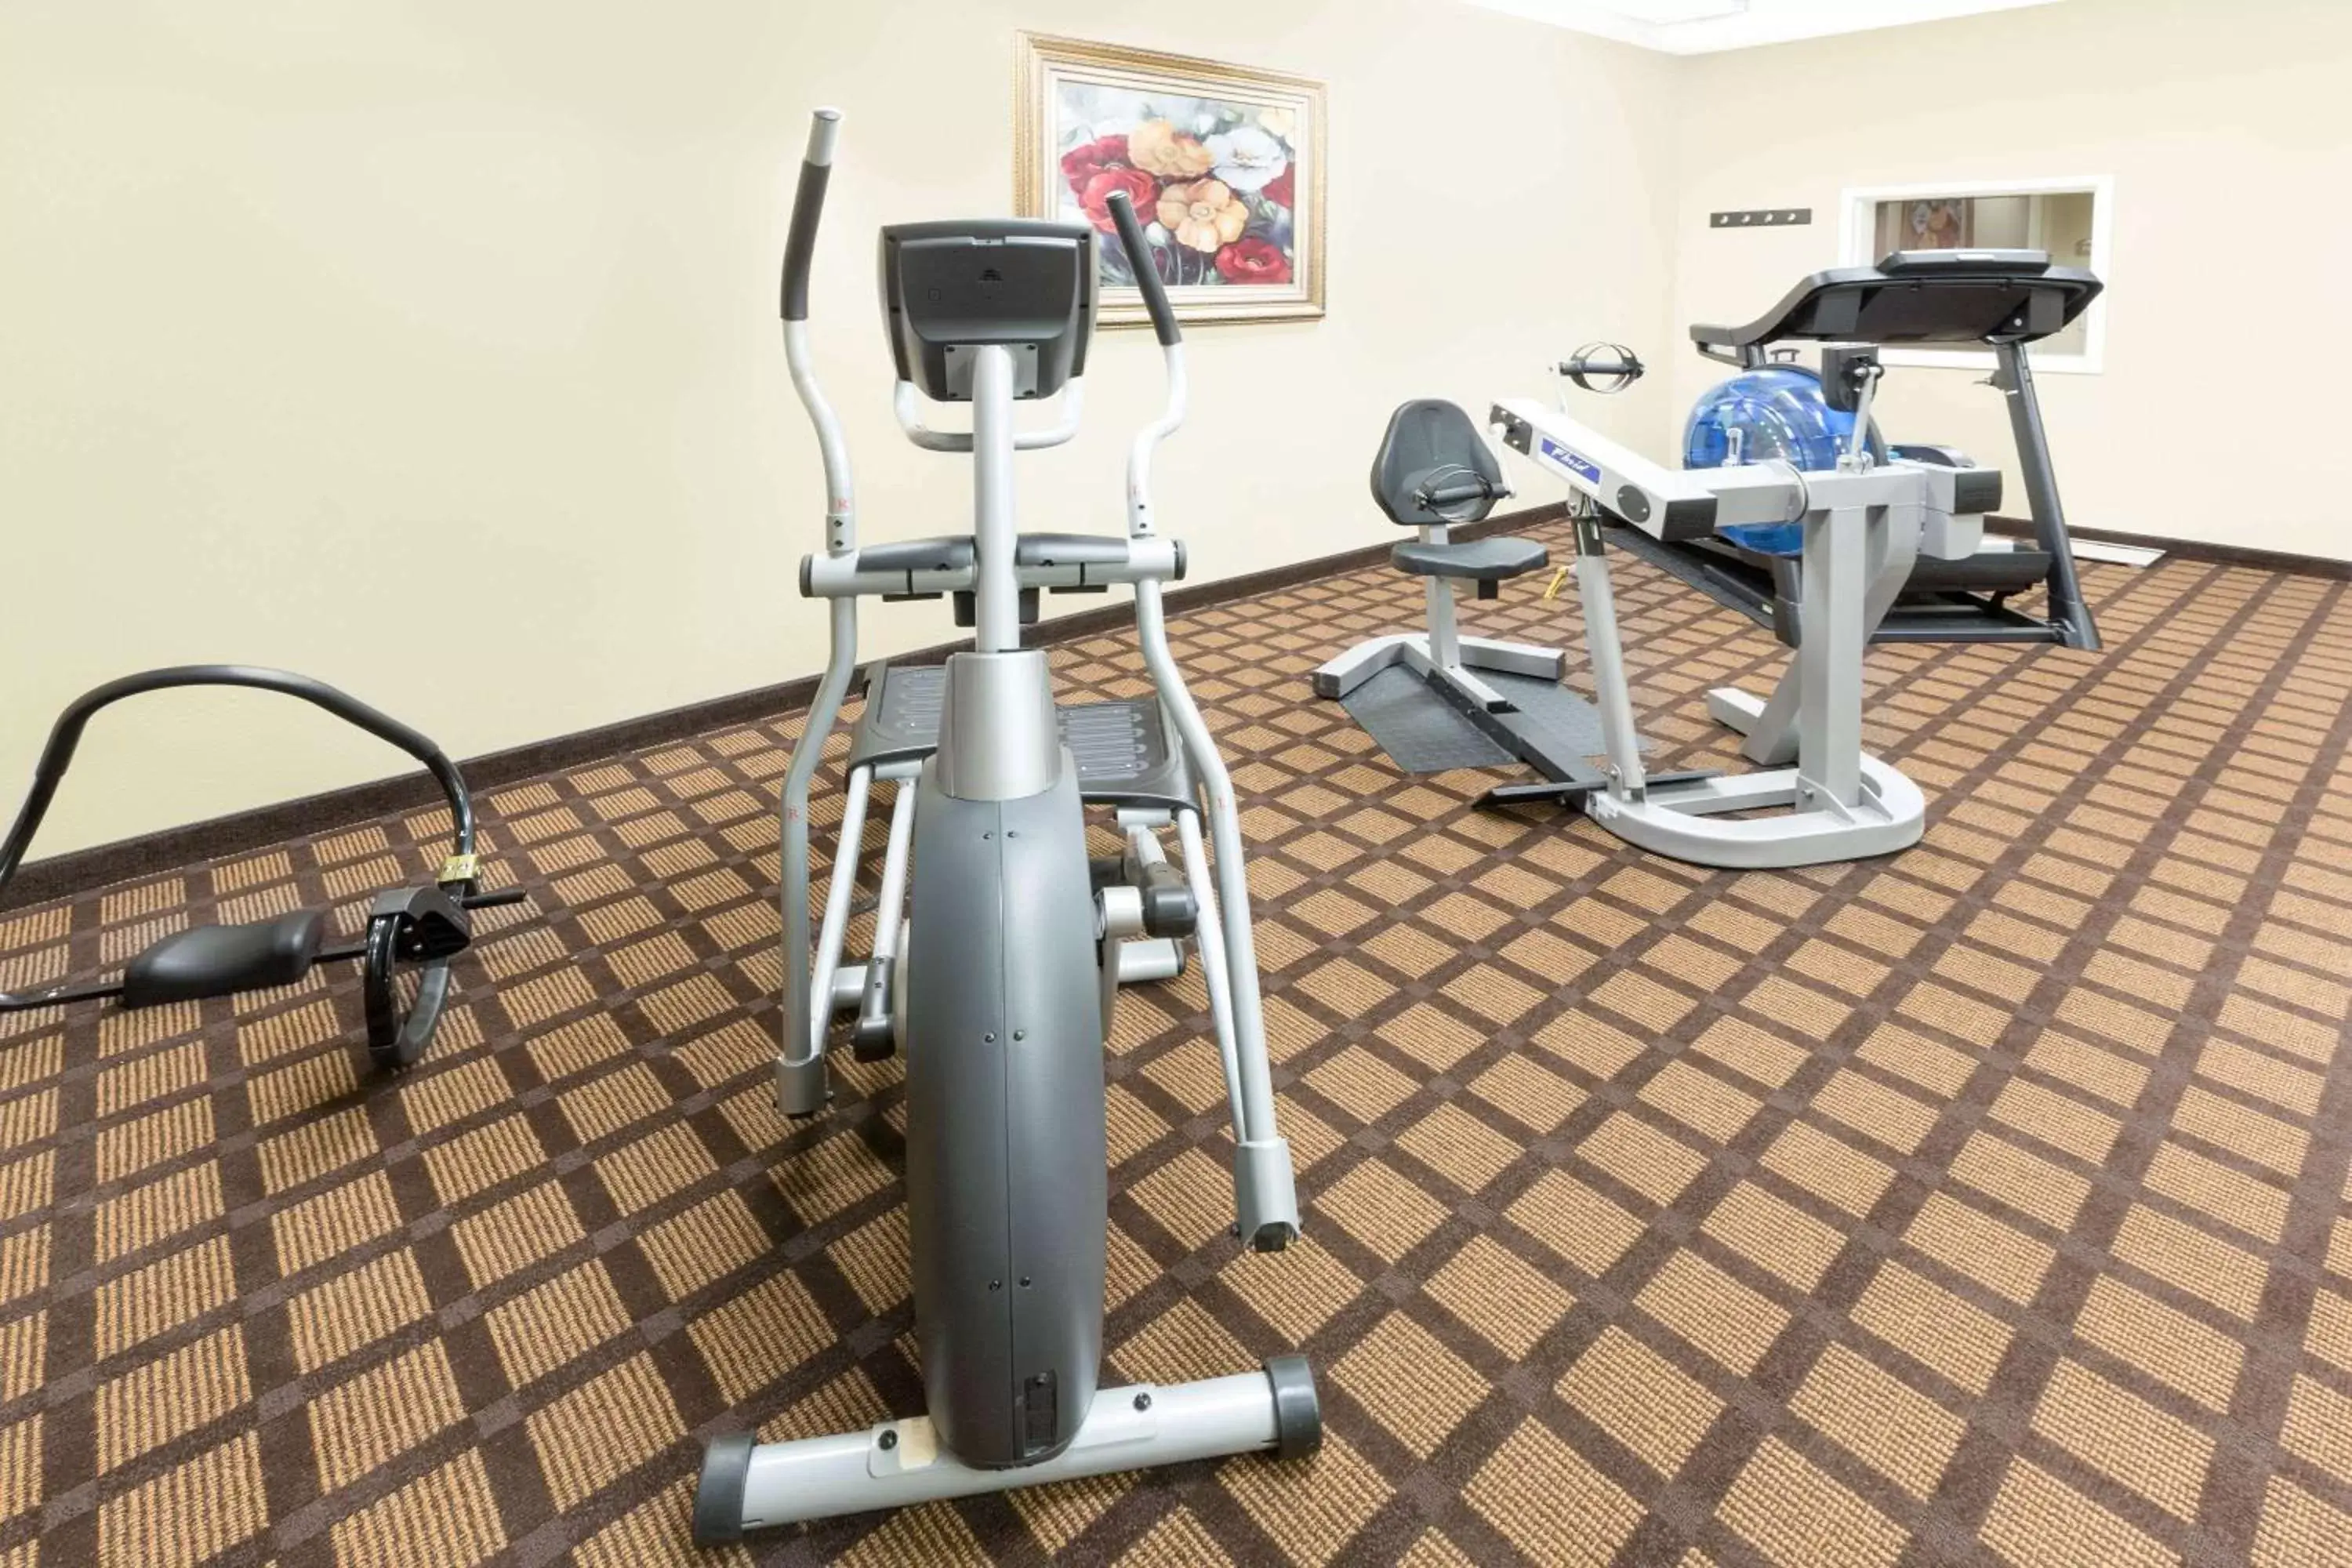 Fitness centre/facilities, Fitness Center/Facilities in Microtel Inn & Suites by Wyndham Ozark